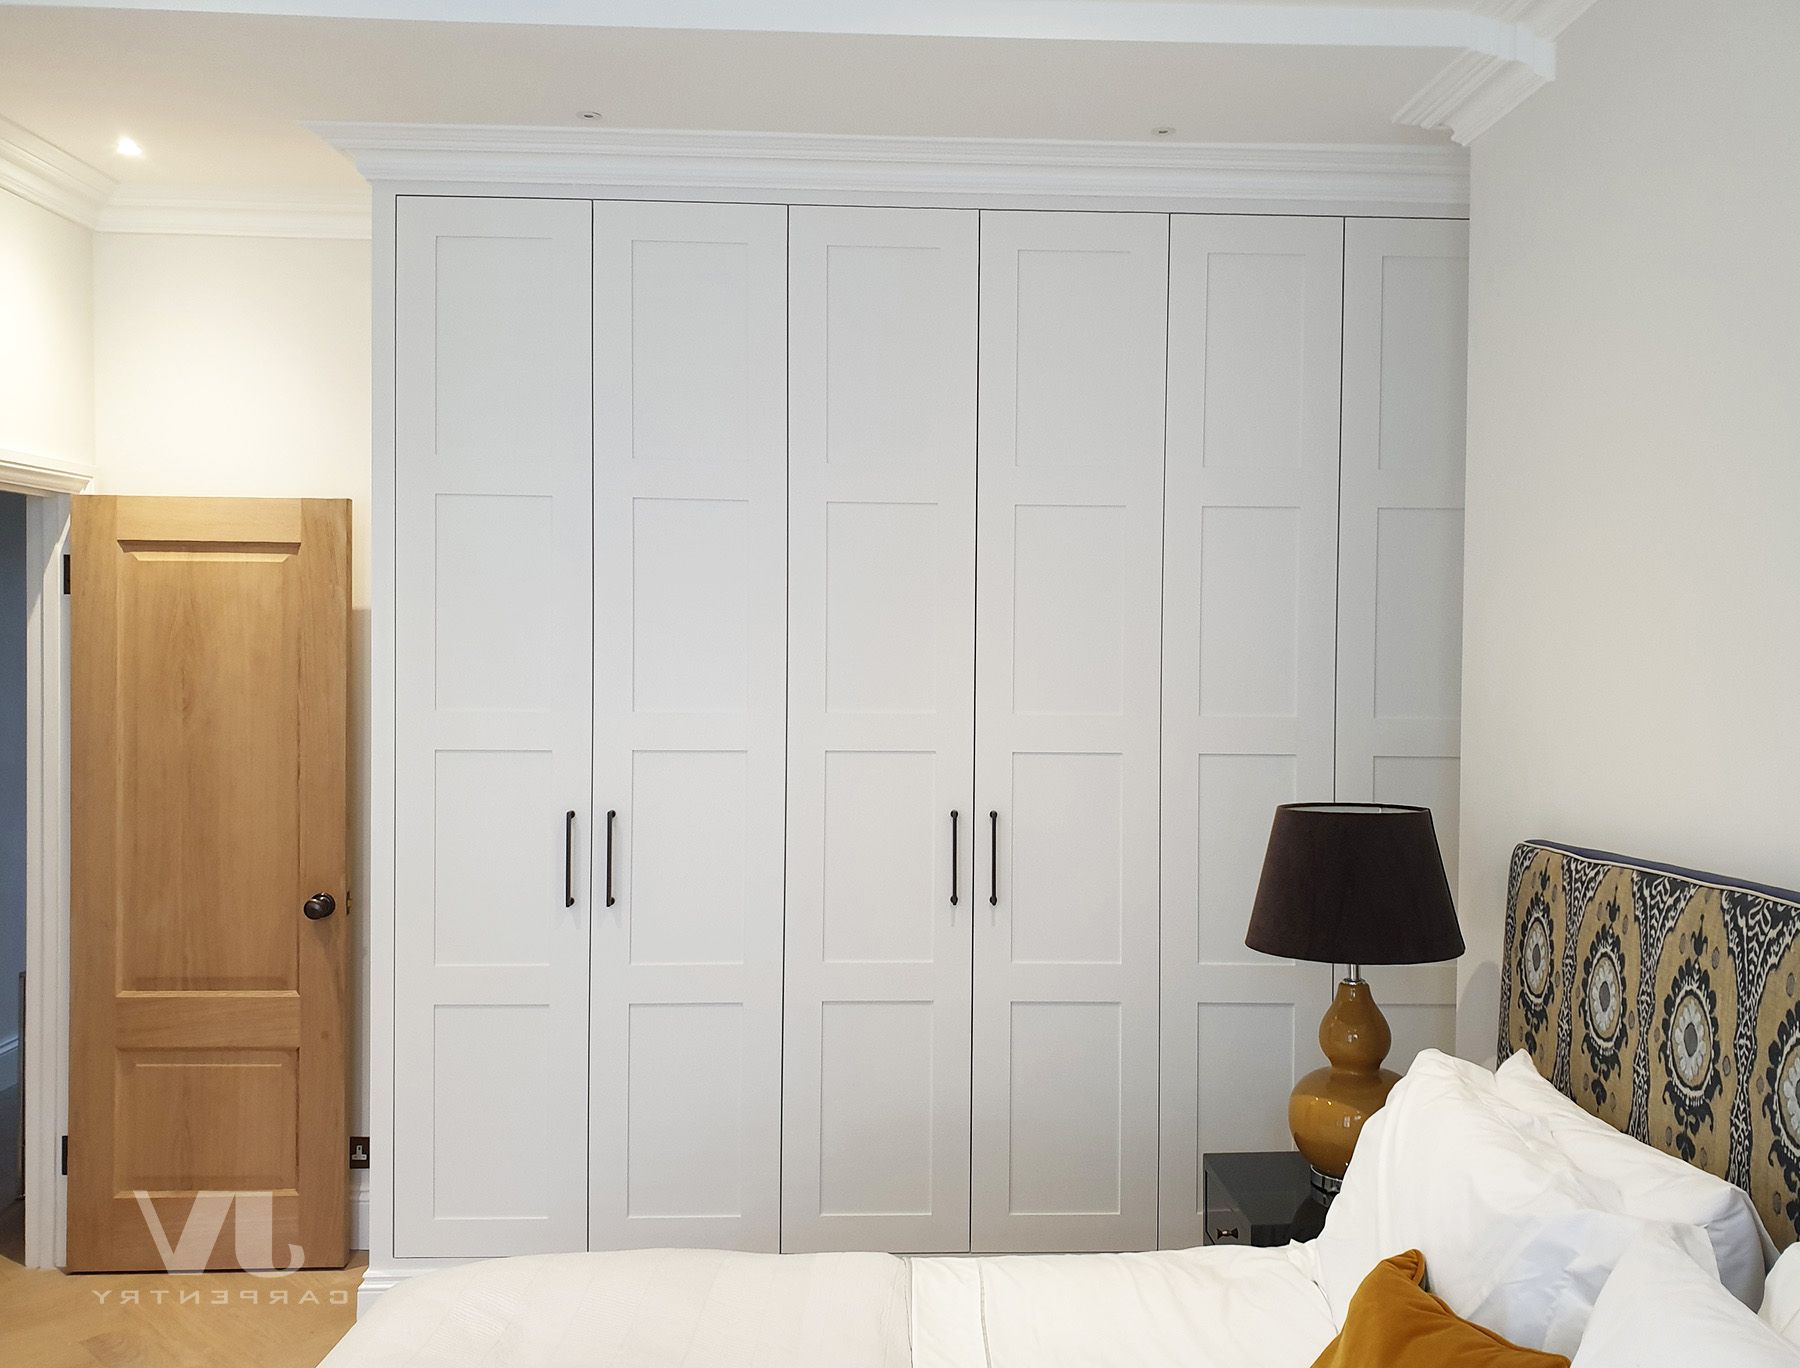 Fitted Wardrobes | Bespoke Bedroom Furniture | Jv Carpentry Intended For Where To  Wardrobes (Gallery 12 of 20)